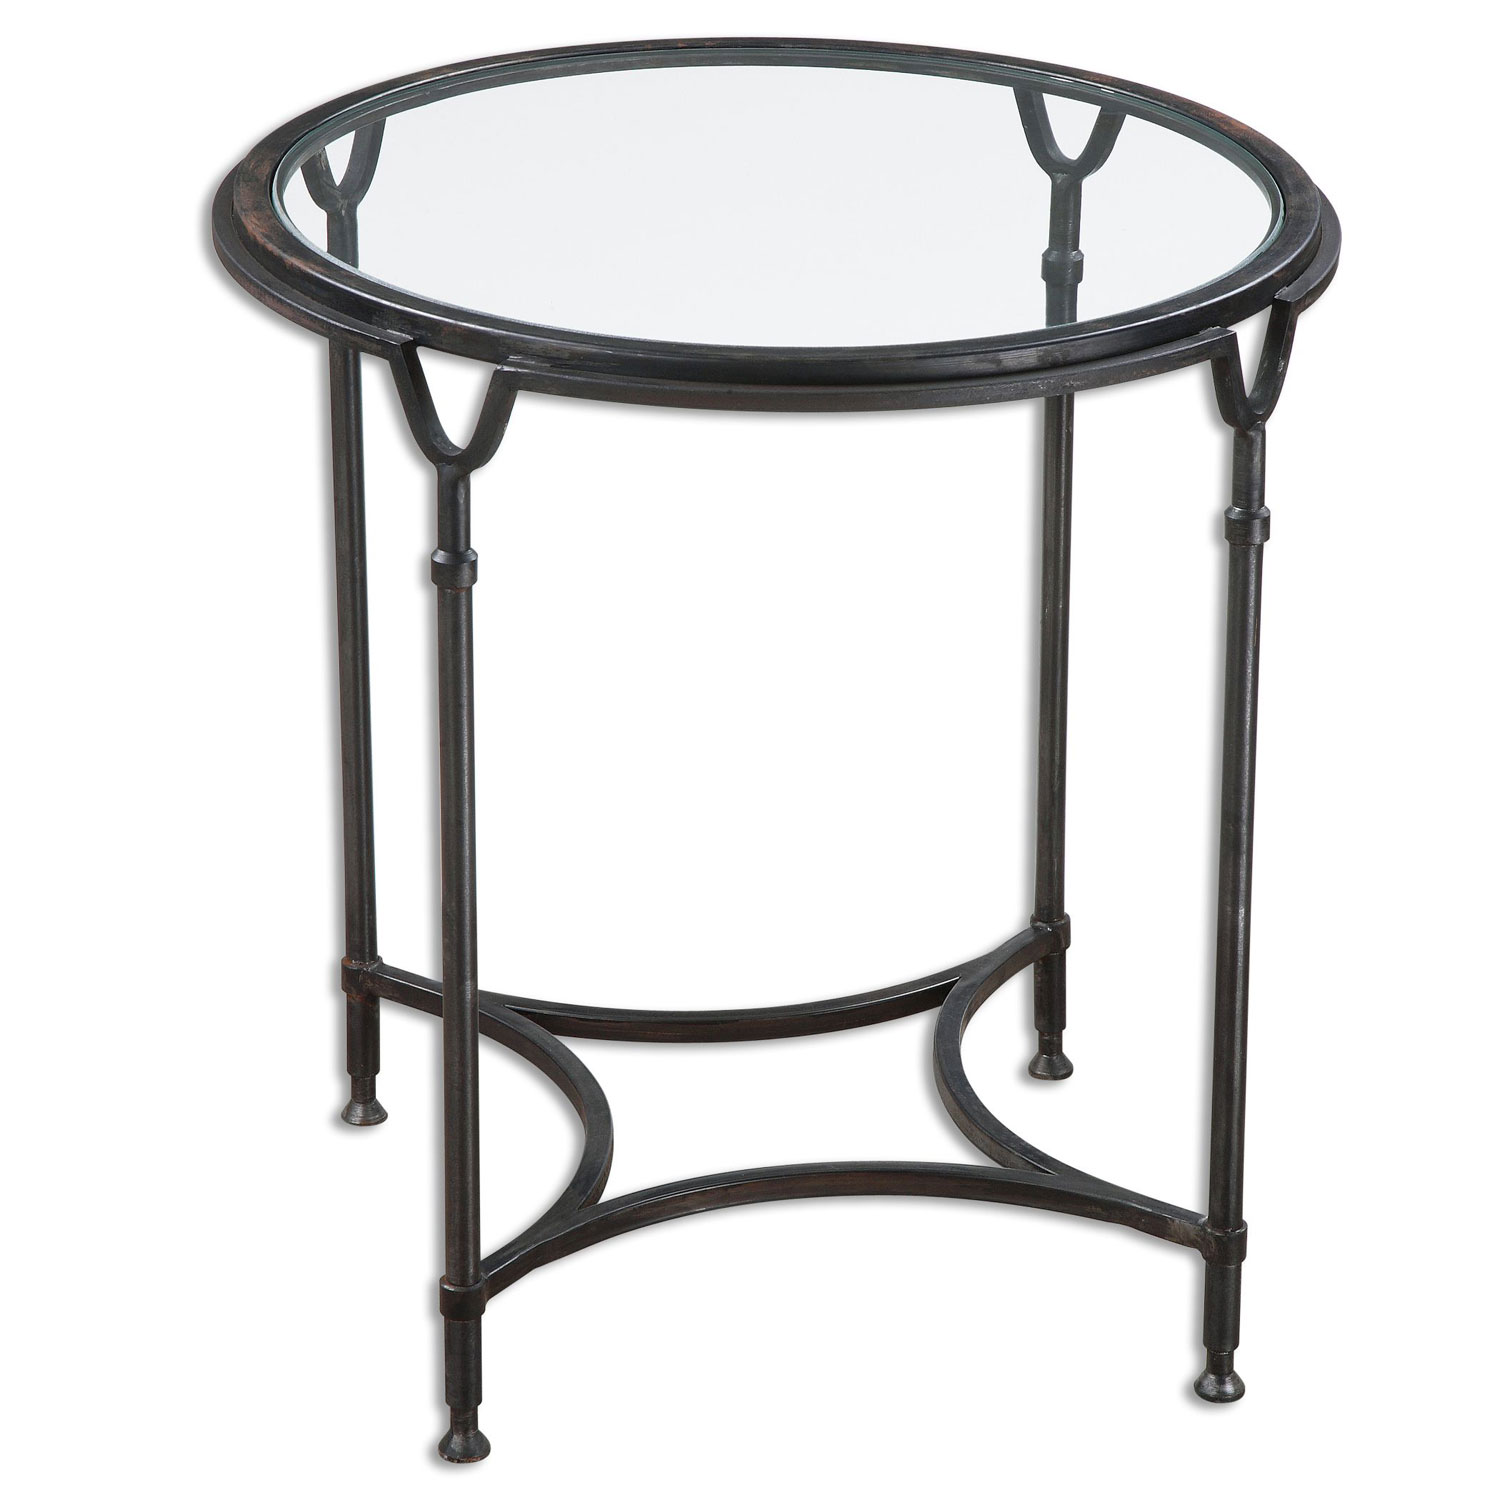 uttermost samson black side table bellacor blythe accent hover zoom free fall runner quilt patterns narrow console cabinet trestle bench legs patio furniture dining sets concrete